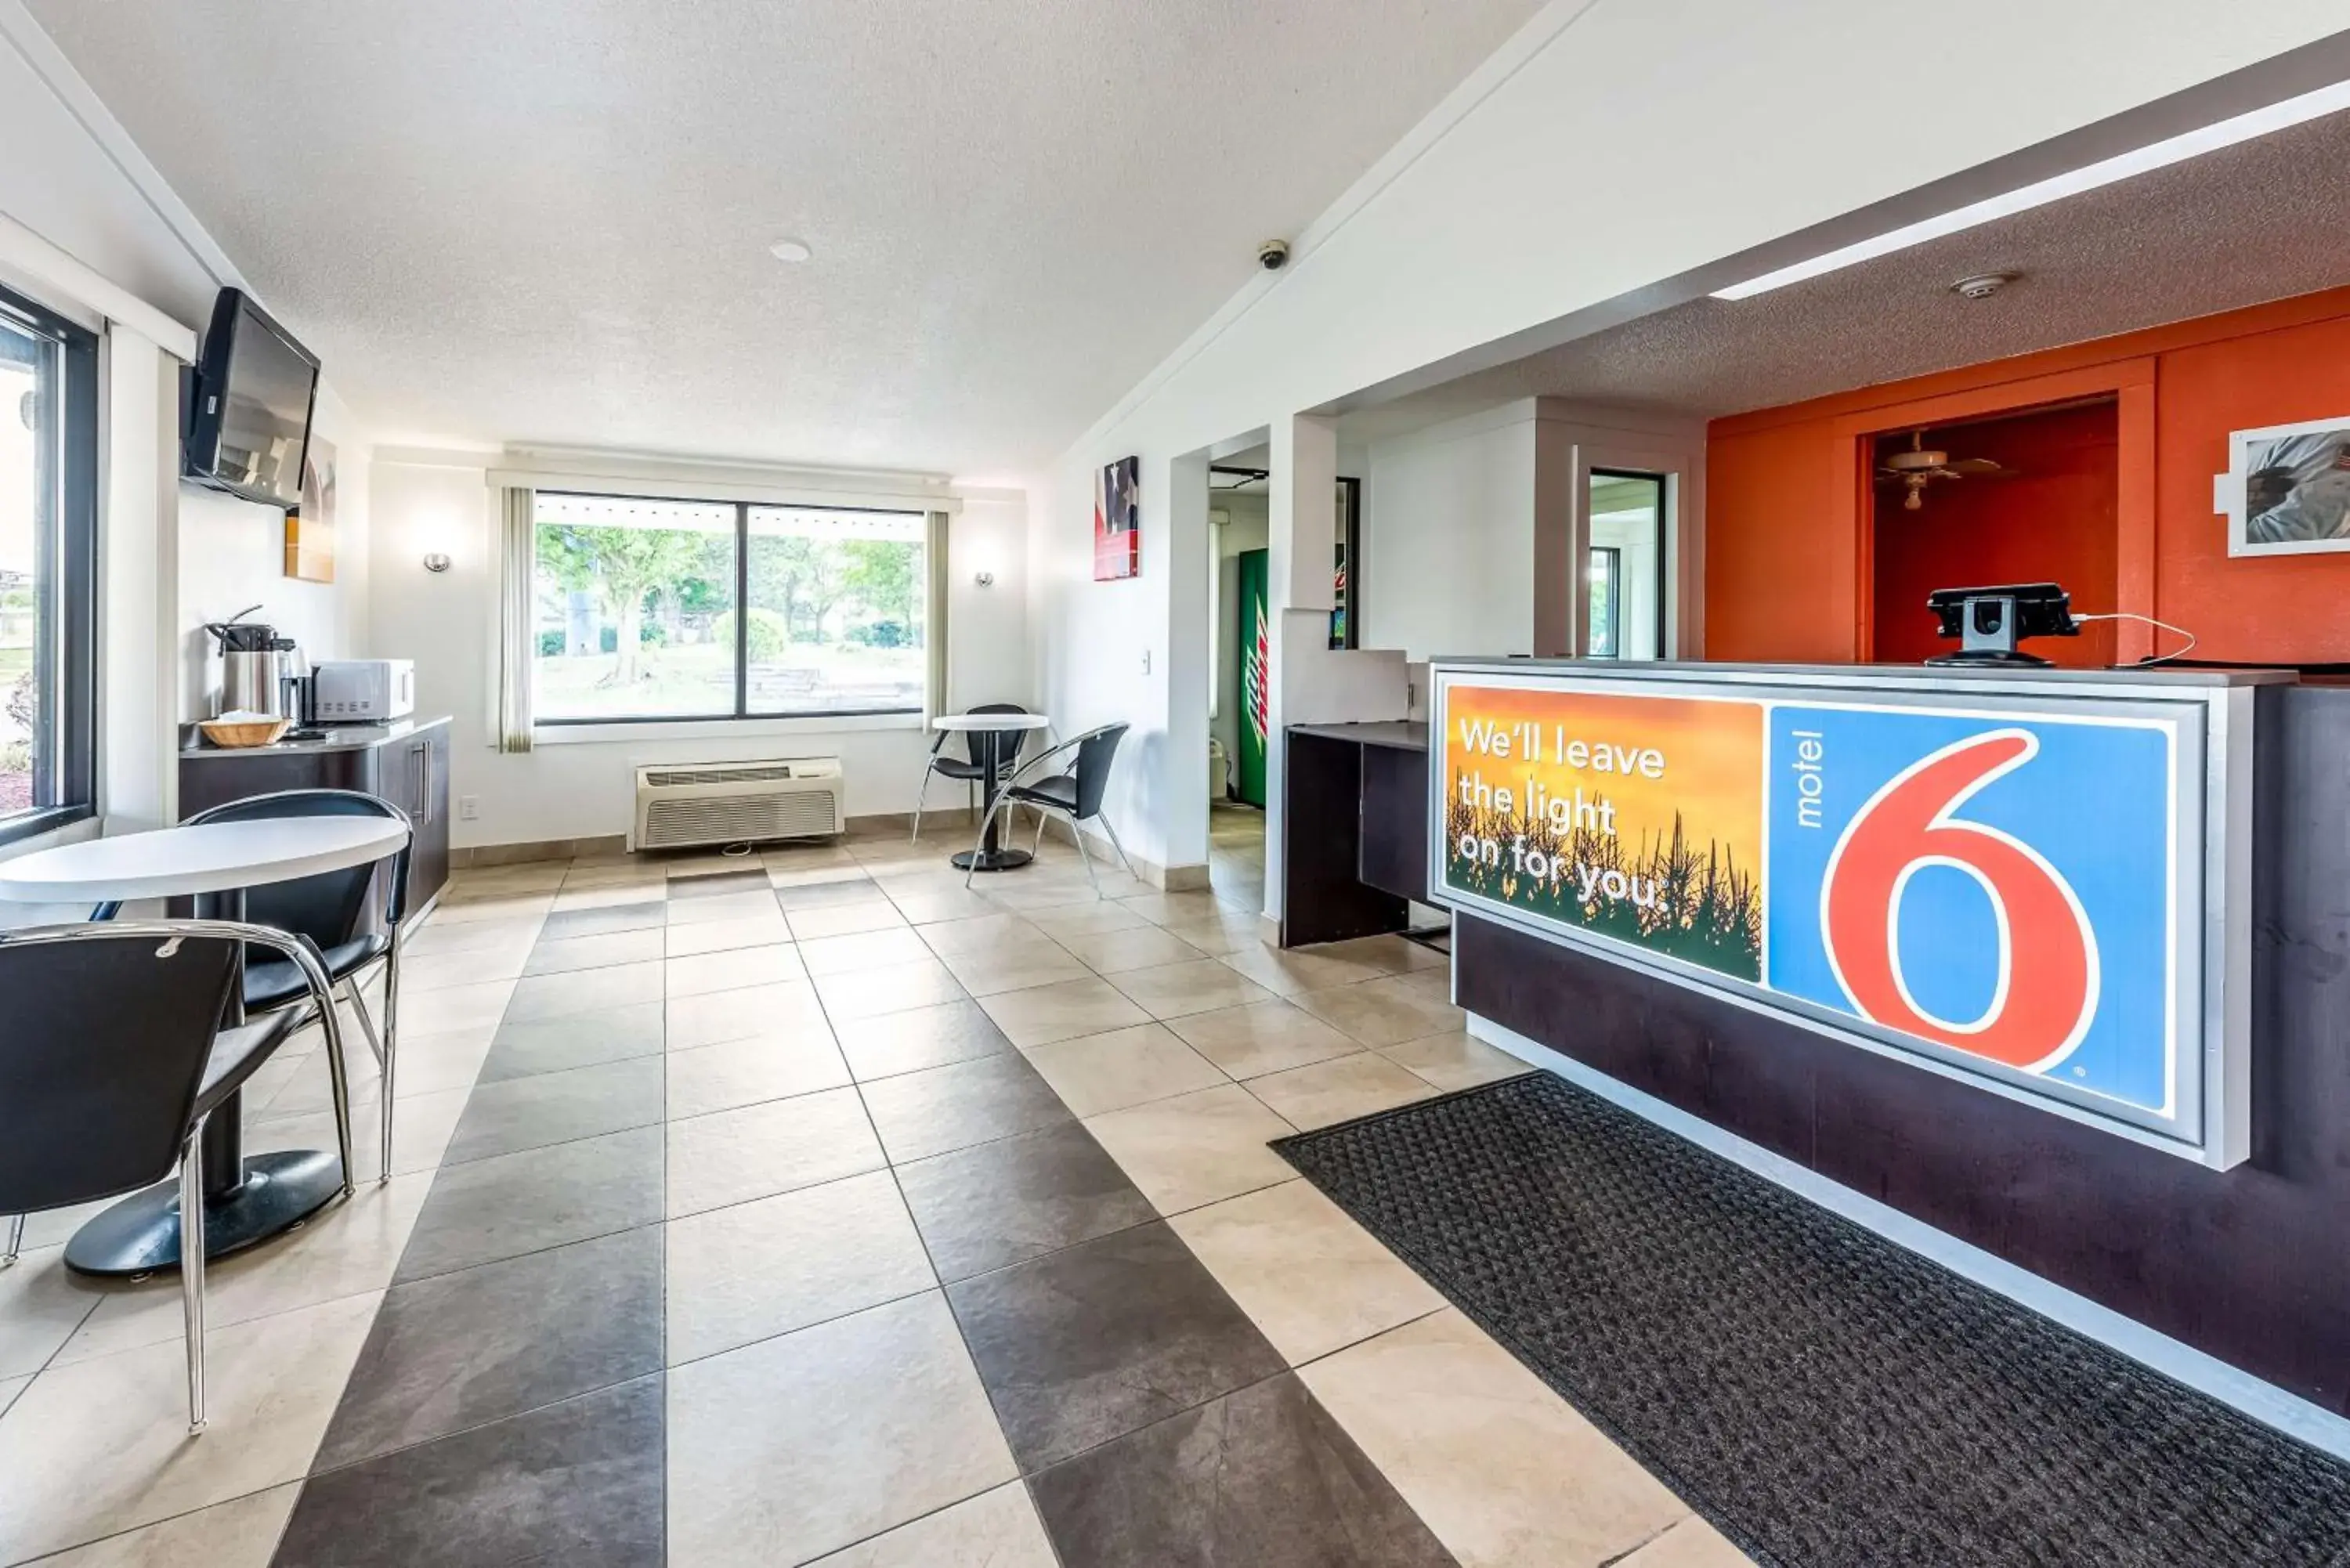 Lobby or reception in Motel 6-Mansfield, OH